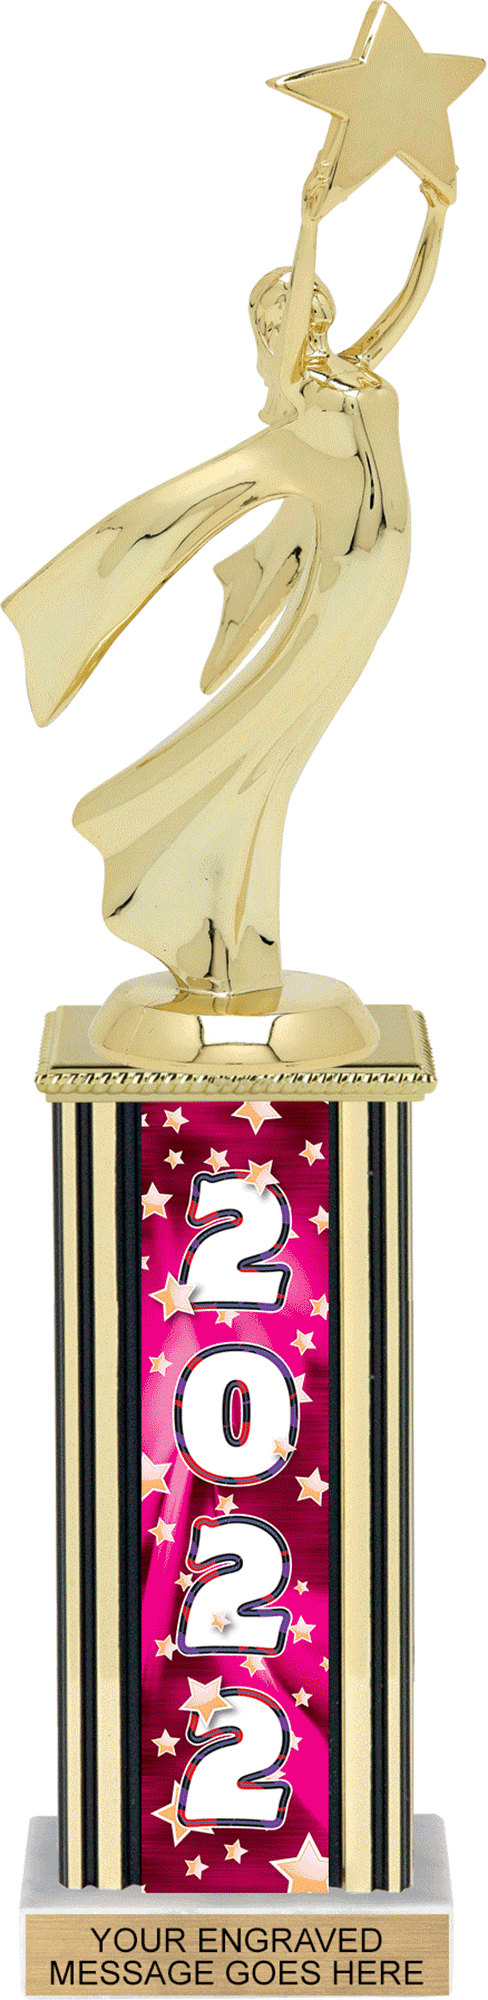 Year Glowing Stars Rectangle Column Trophy - Pink 12 inch